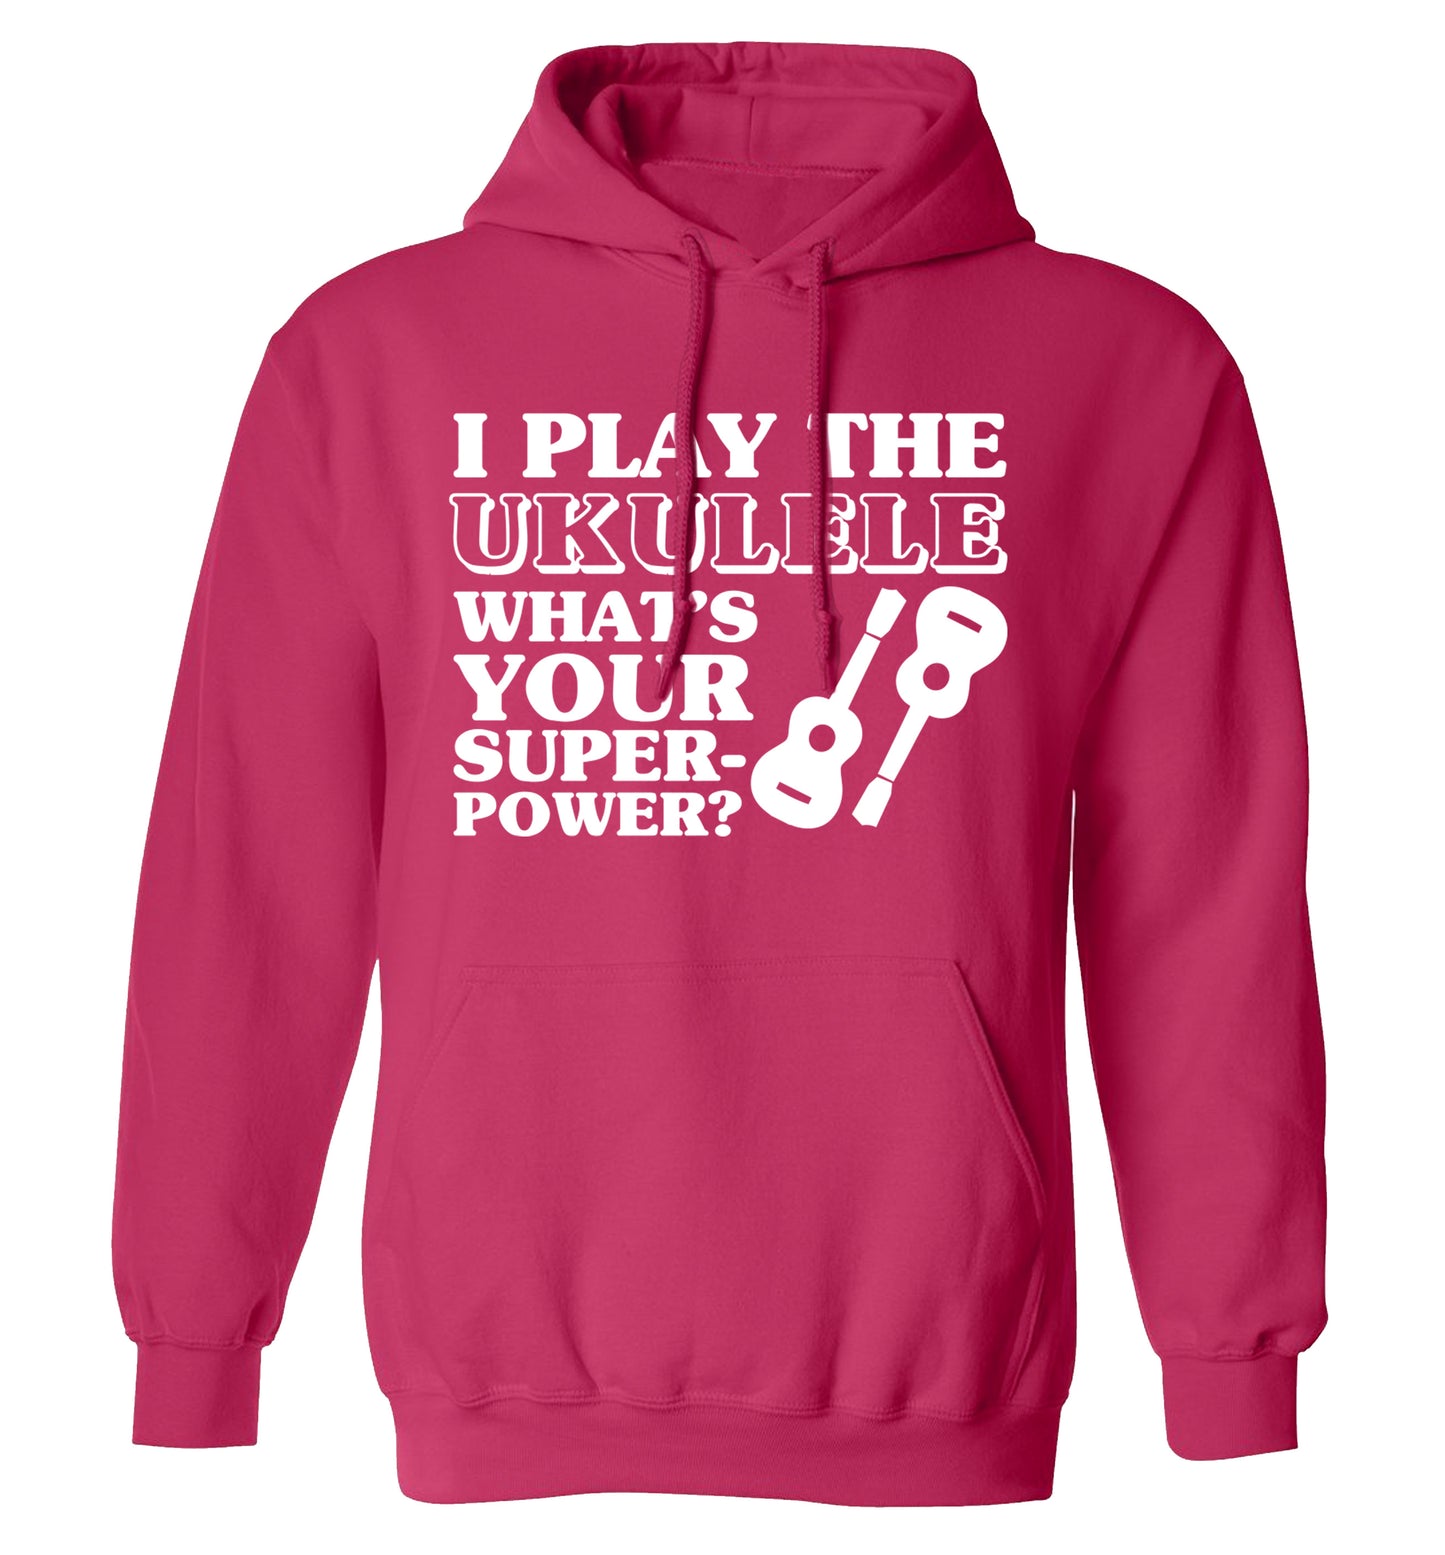 I play the ukulele what's your superpower? adults unisex pink hoodie 2XL